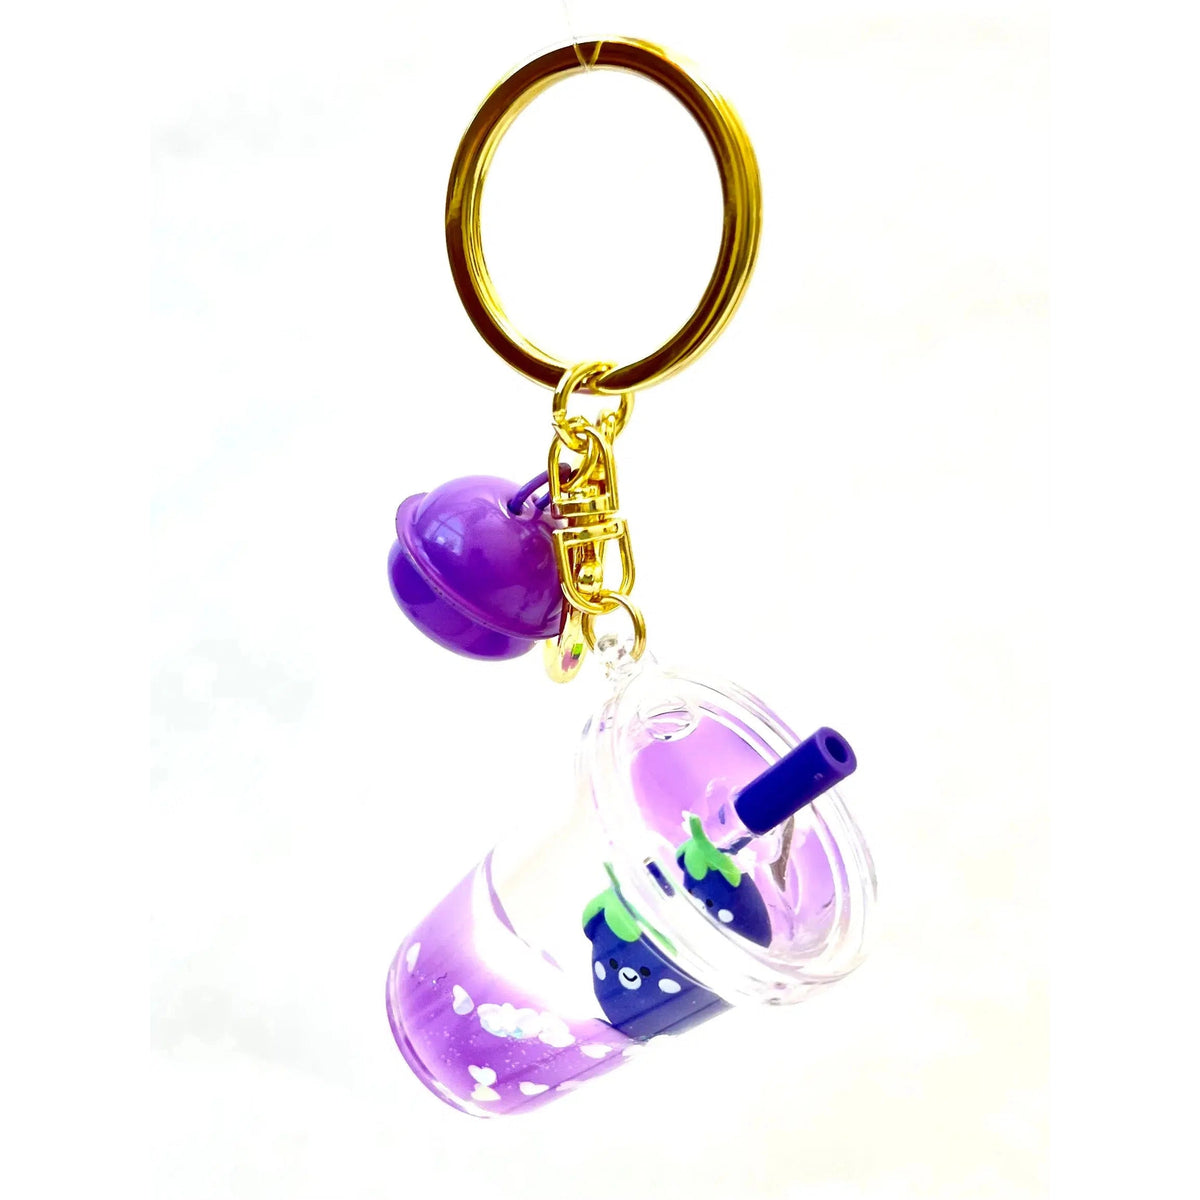 Front view of the cup with straw Eggplant Floaty Key Charm showing the bell at the top of the keychain.